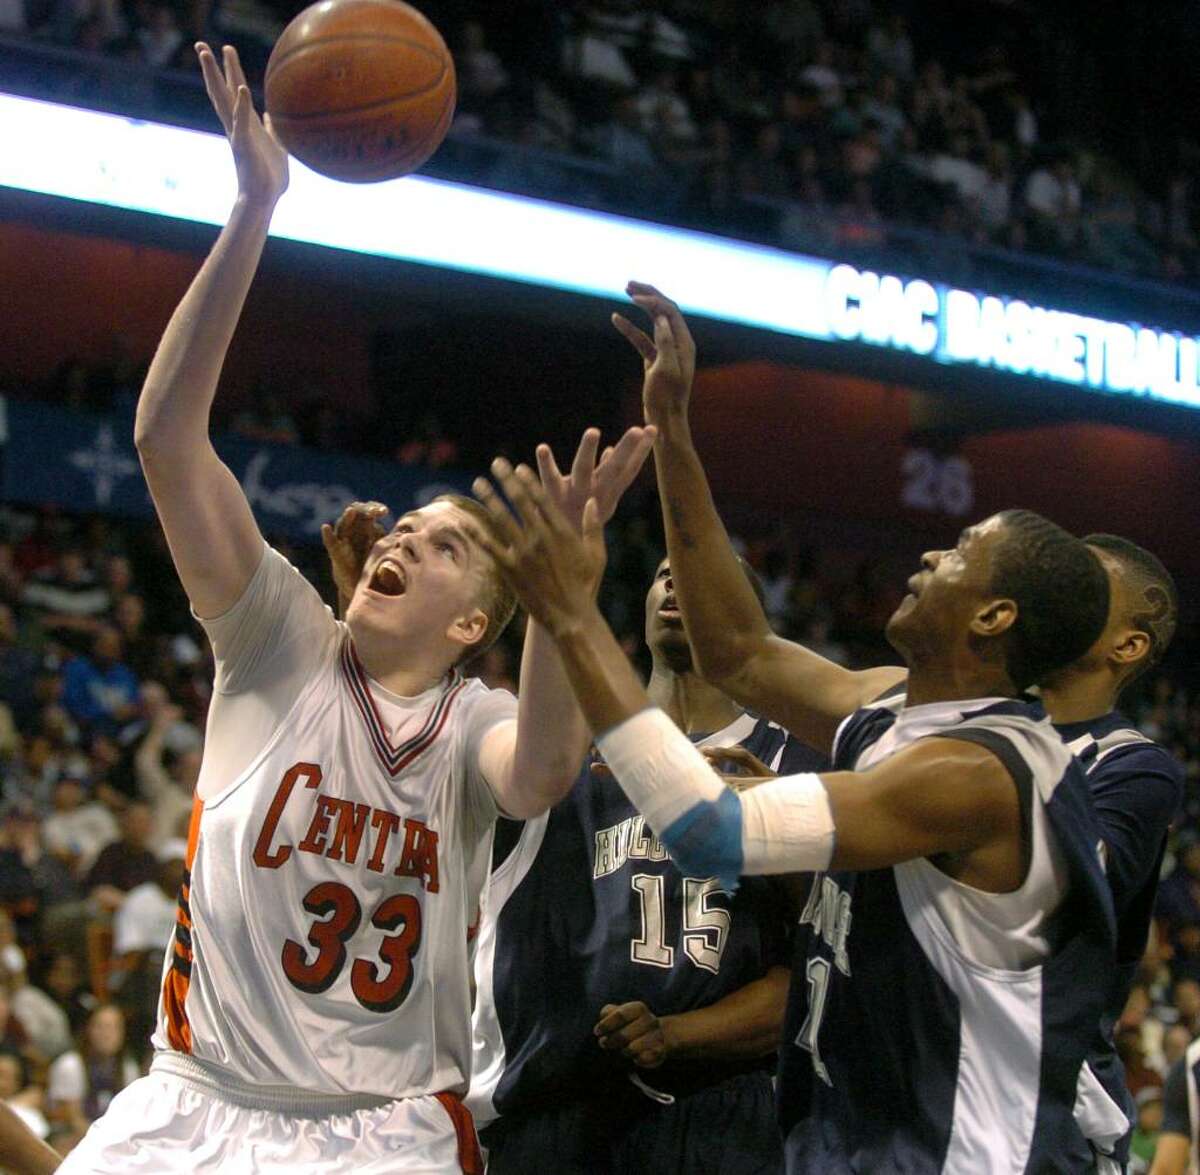 Central's #33 Andrew Victoria struggles to capture a rebound, during Class L state championship action against Hillhouse at Mohegan Sun Arena in Uncasville, Conn. on Saturday Mar. 20, 2010.